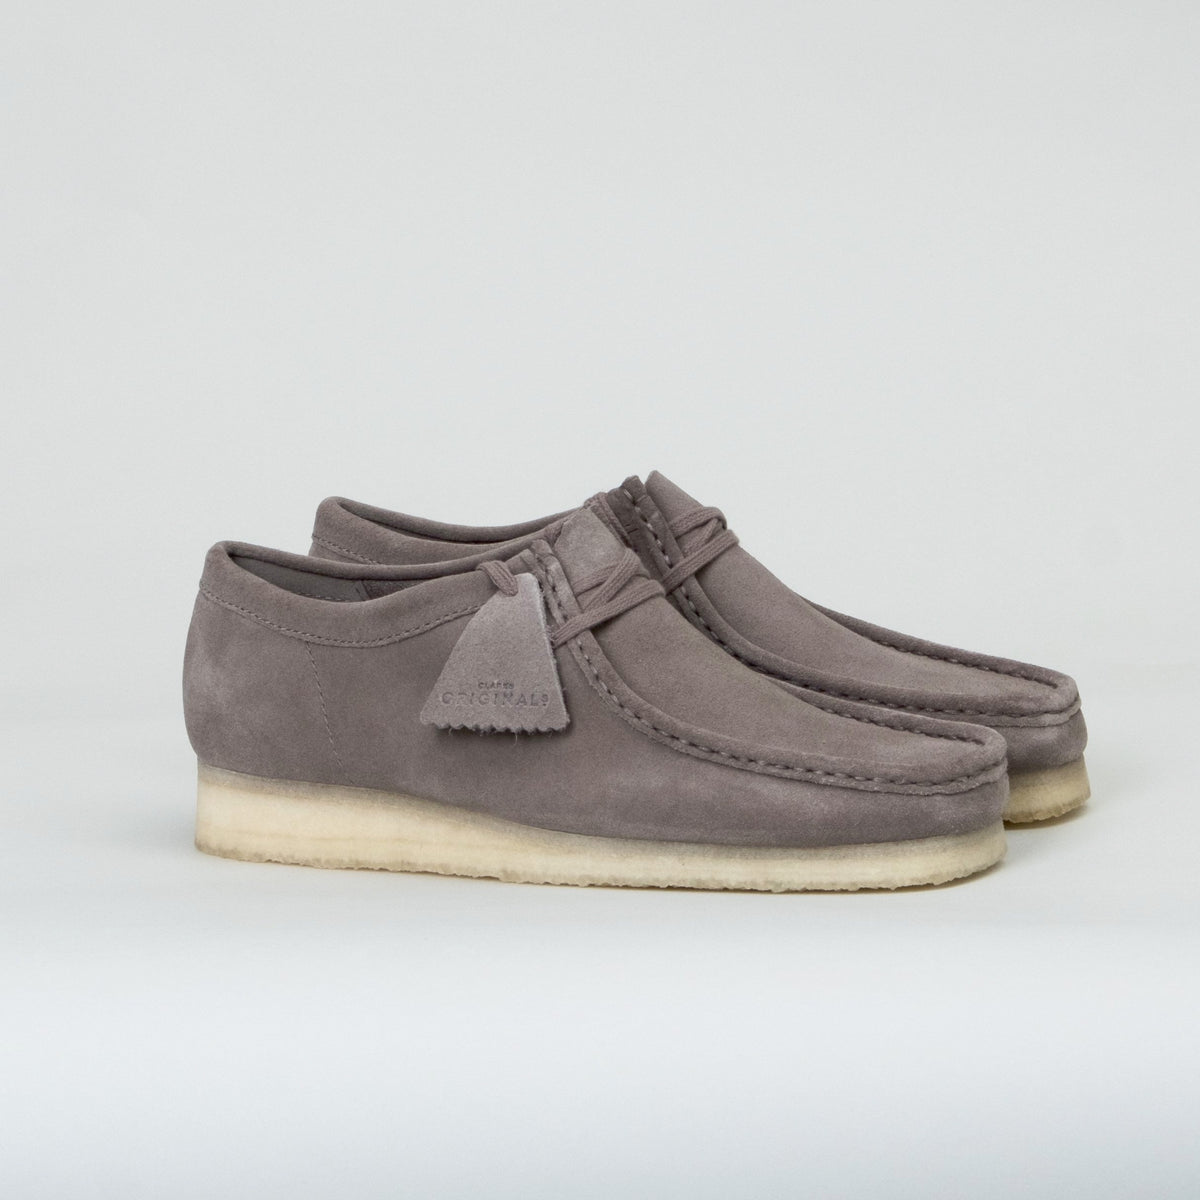 clarks grey suede shoes